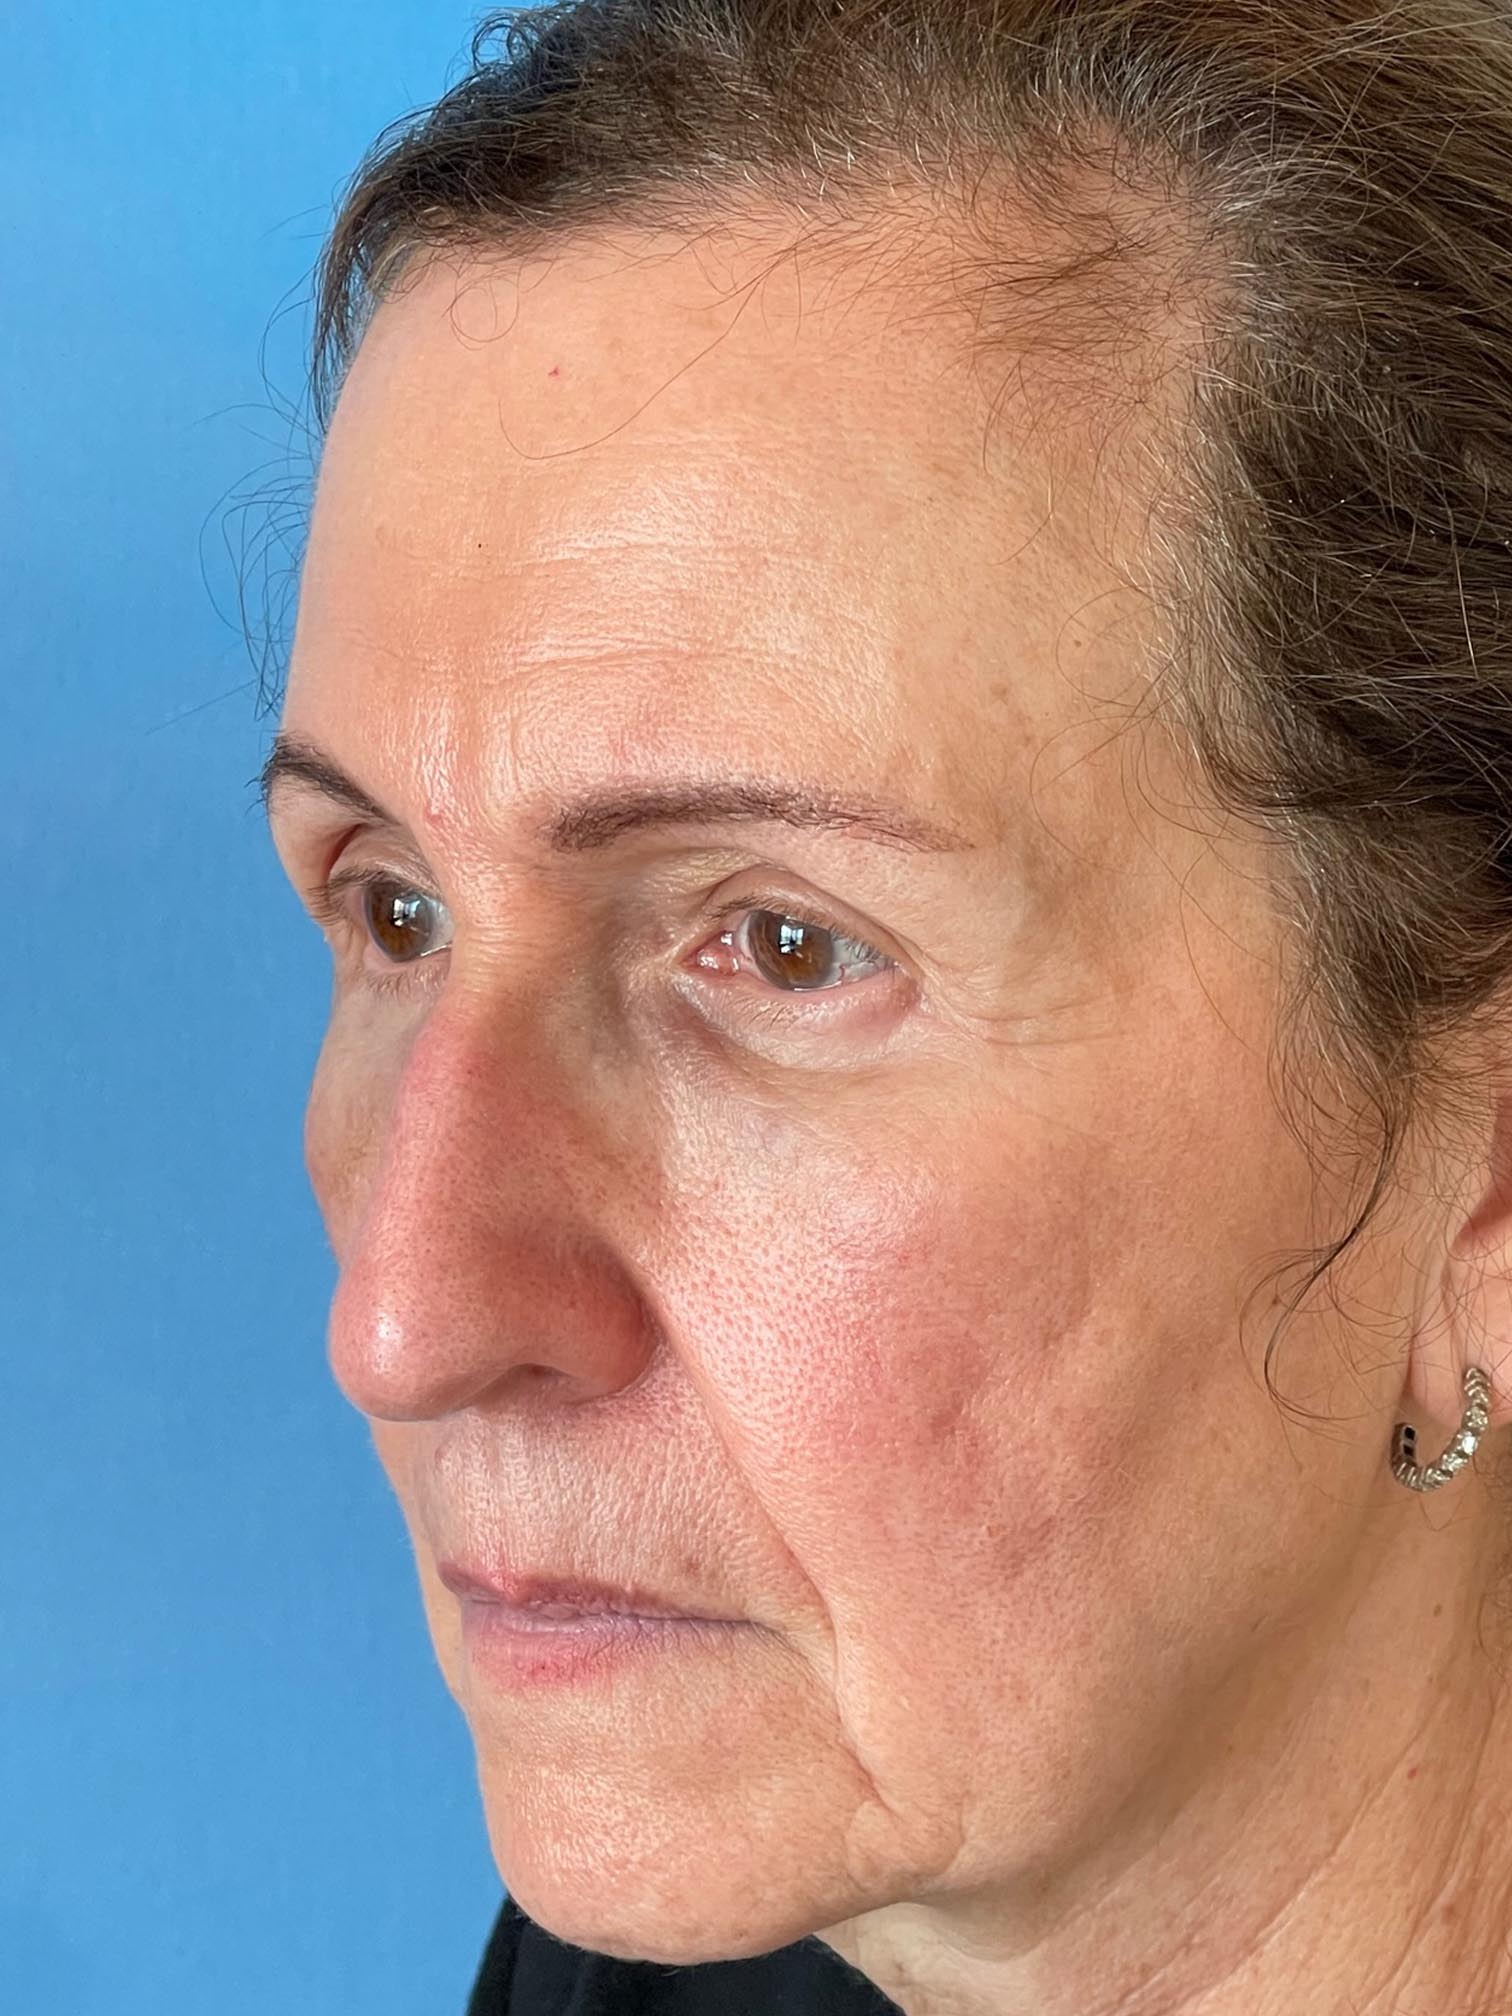 Photo of the patient’s face after the Blepharoplasty surgery. Patient 4 - Set 1